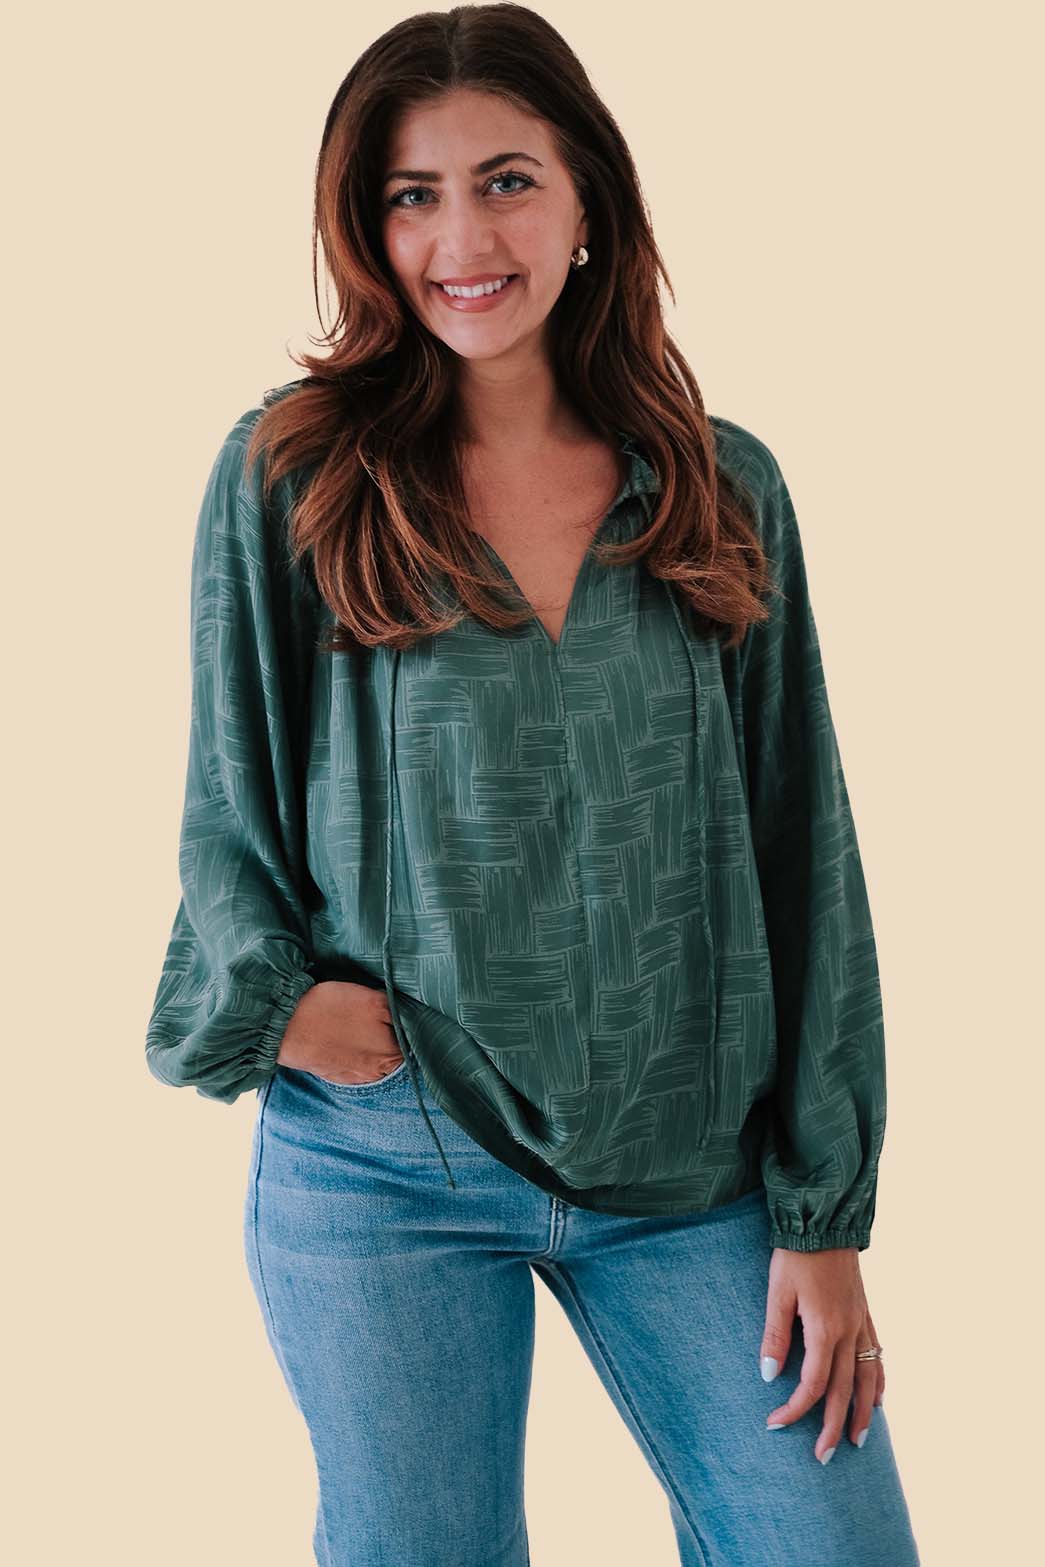 Current Air Giana Etch Printed Long Sleeve Top (Green)